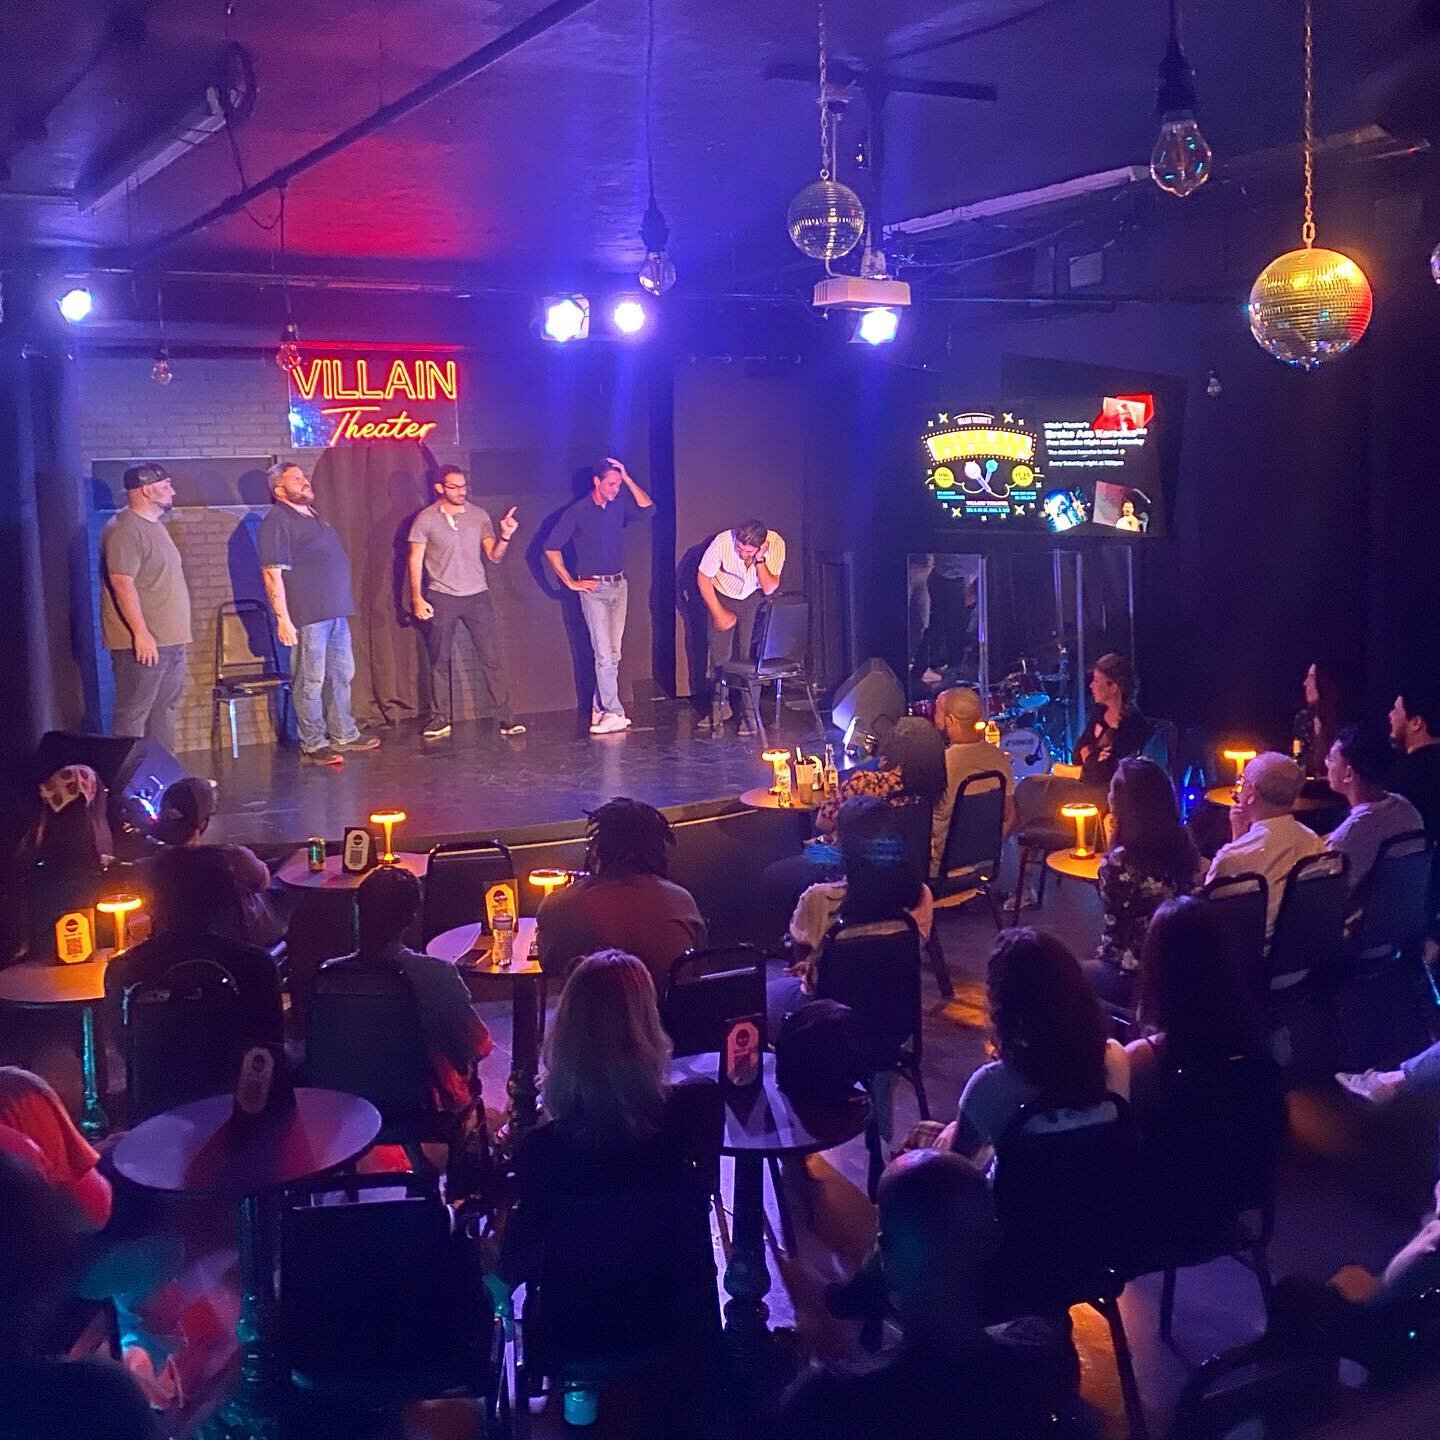 It's Friday, and you know what that means... it's time to unleash the comedy chaos at Villain Theater! Join us tonight for our electrifying Improv Show and Feel Good Friday&rsquo;s Stand-Up Show where our quick-witted performers will have you in stit